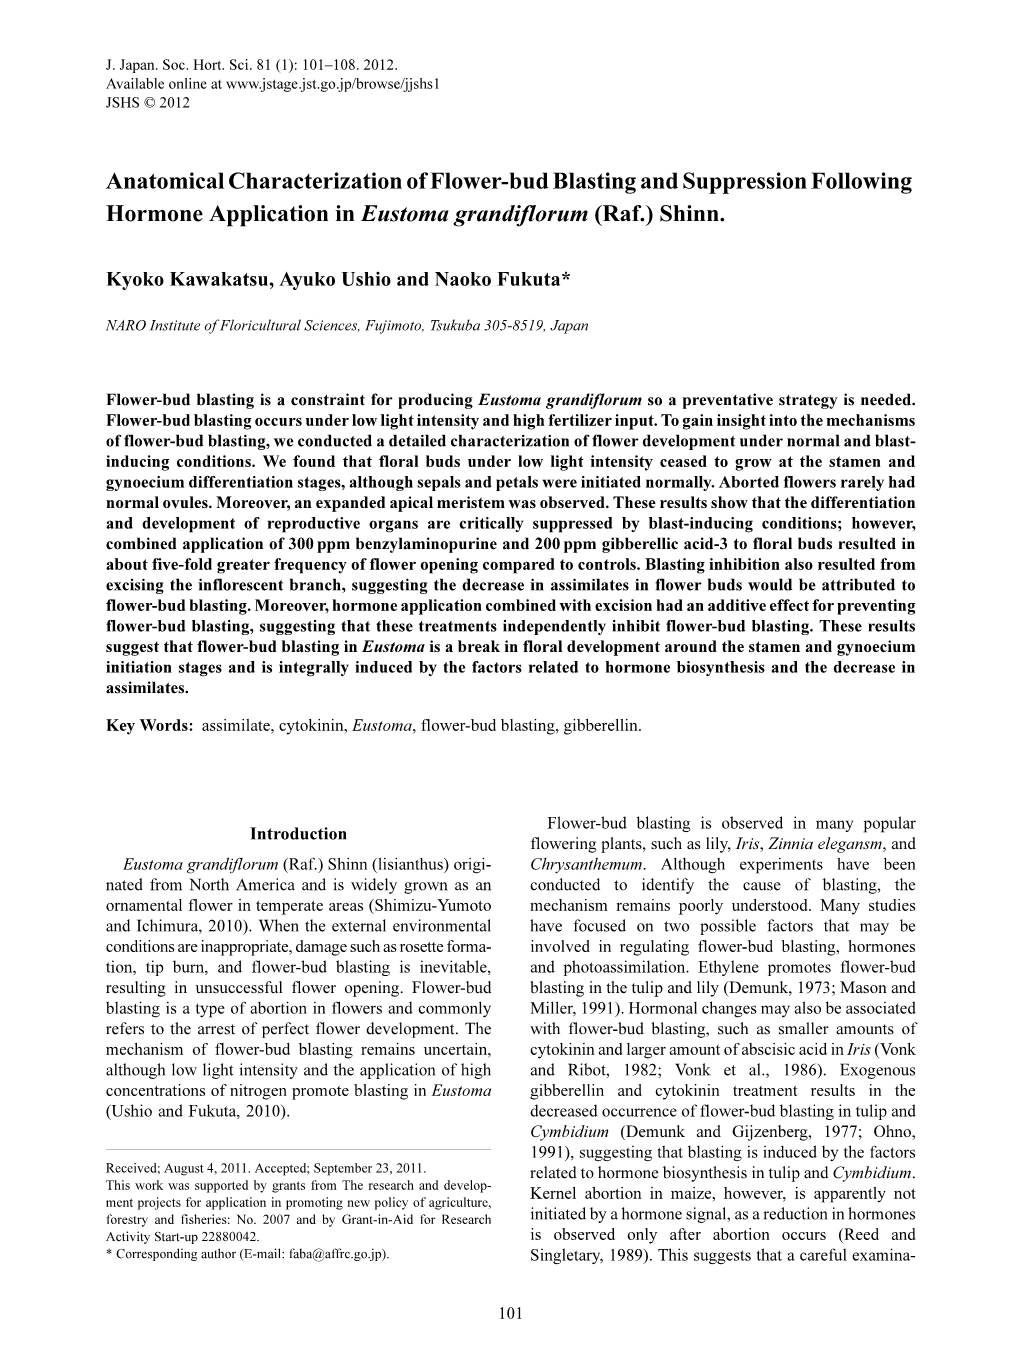 Anatomical Characterization of Flower-Bud Blasting and Suppression Following Hormone Application in Eustoma Grandiflorum (Raf.) Shinn